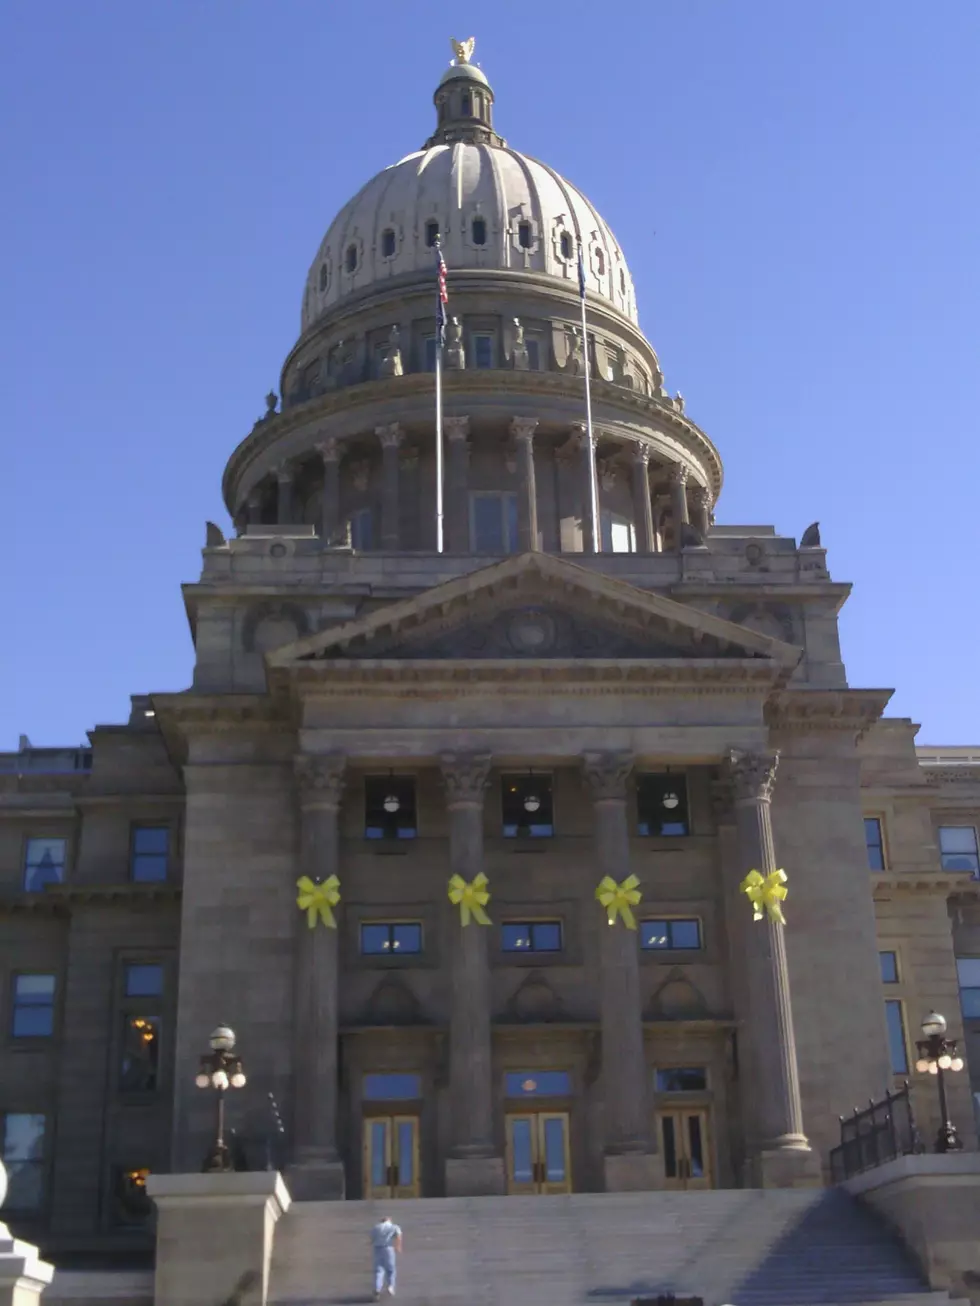 Yellow Ribbons Taken Down from Capitol, Move to Memorial